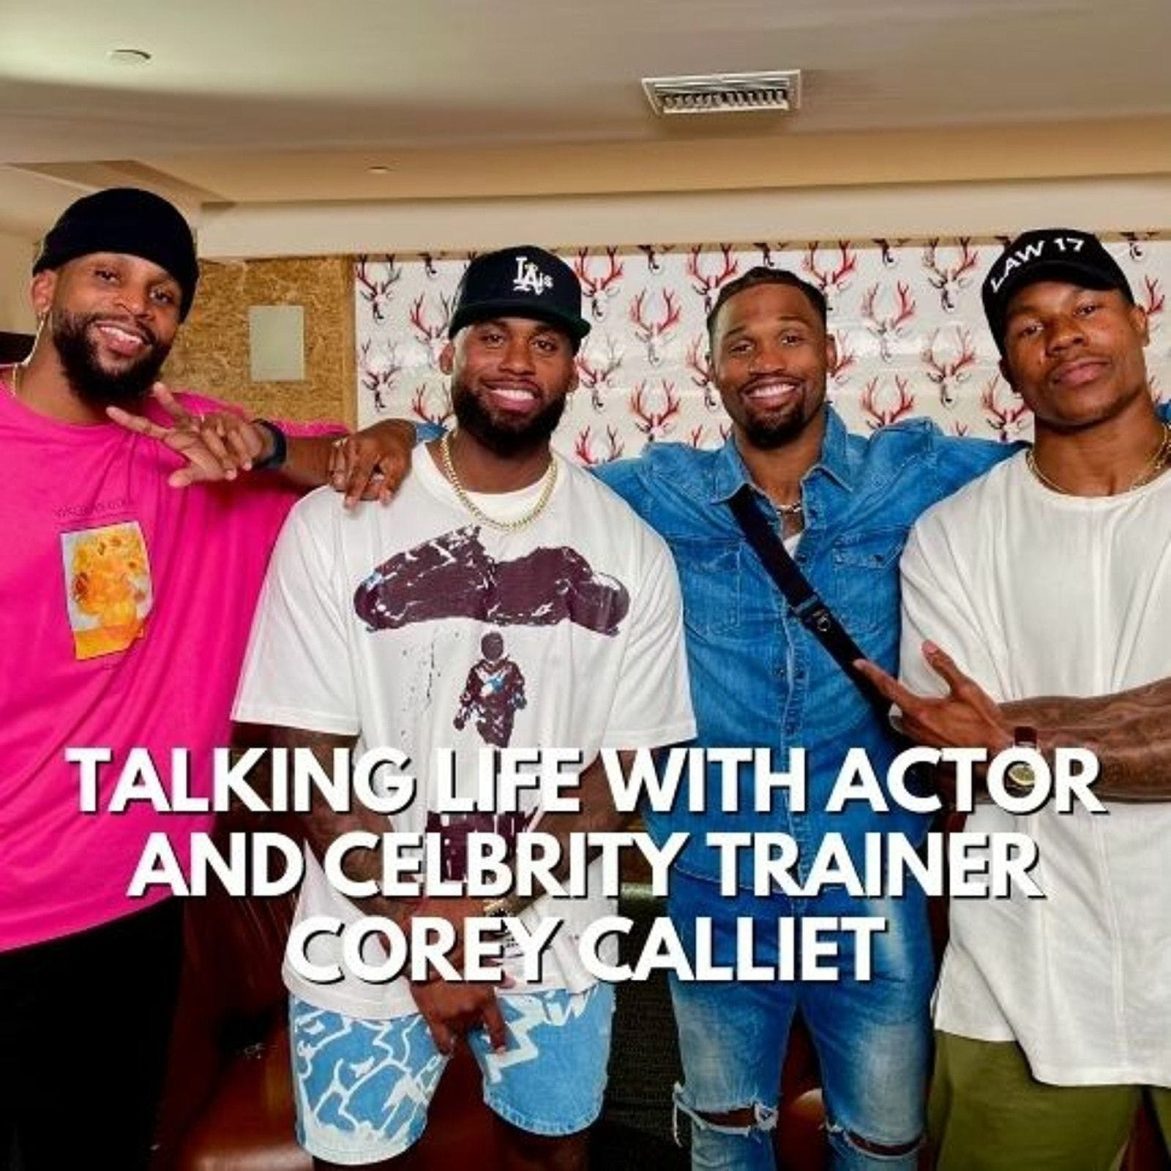 Black Podcasting - TALKING LIFE WITH ACTOR AND CELEBRITY TRAINER COREY CALLIET S4 EP9